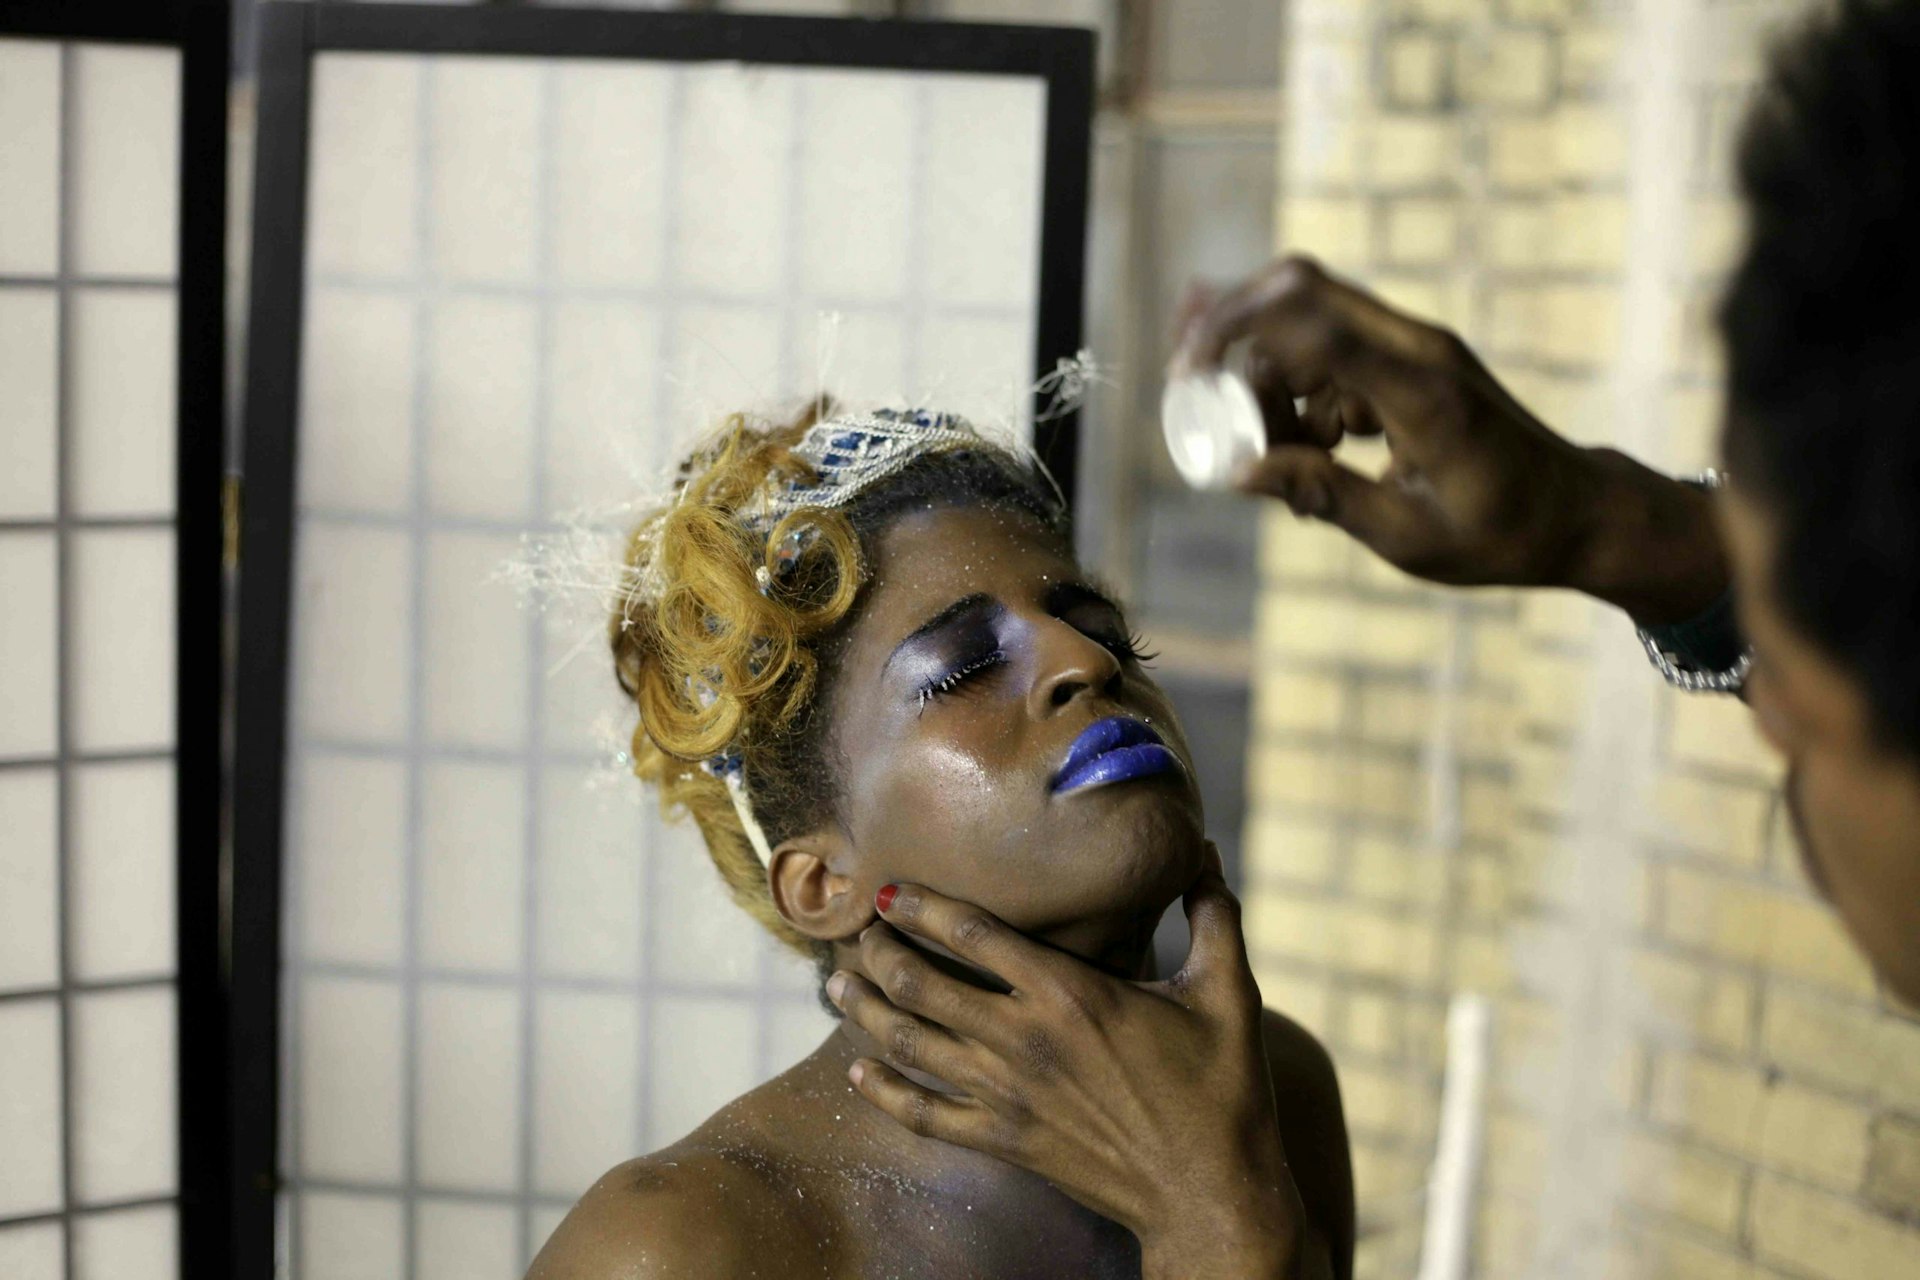 An intimate portrait of NYC's Black, queer, homeless youth